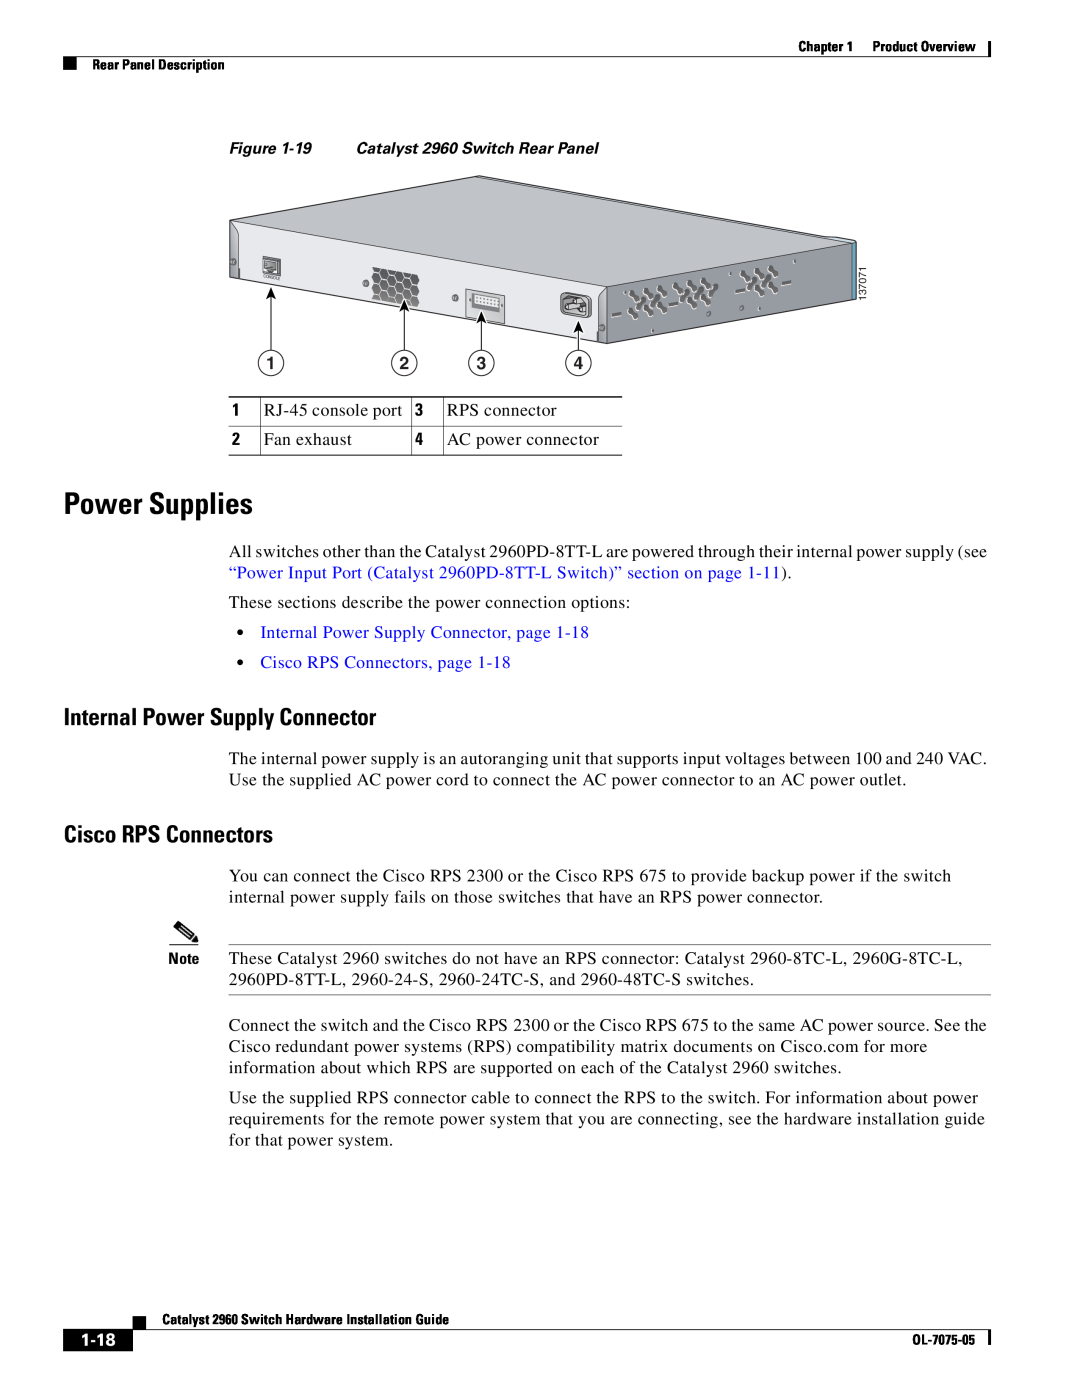 Cisco Systems 2960 specifications Power Supplies, Internal Power Supply Connector, Cisco RPS Connectors, 1-18 